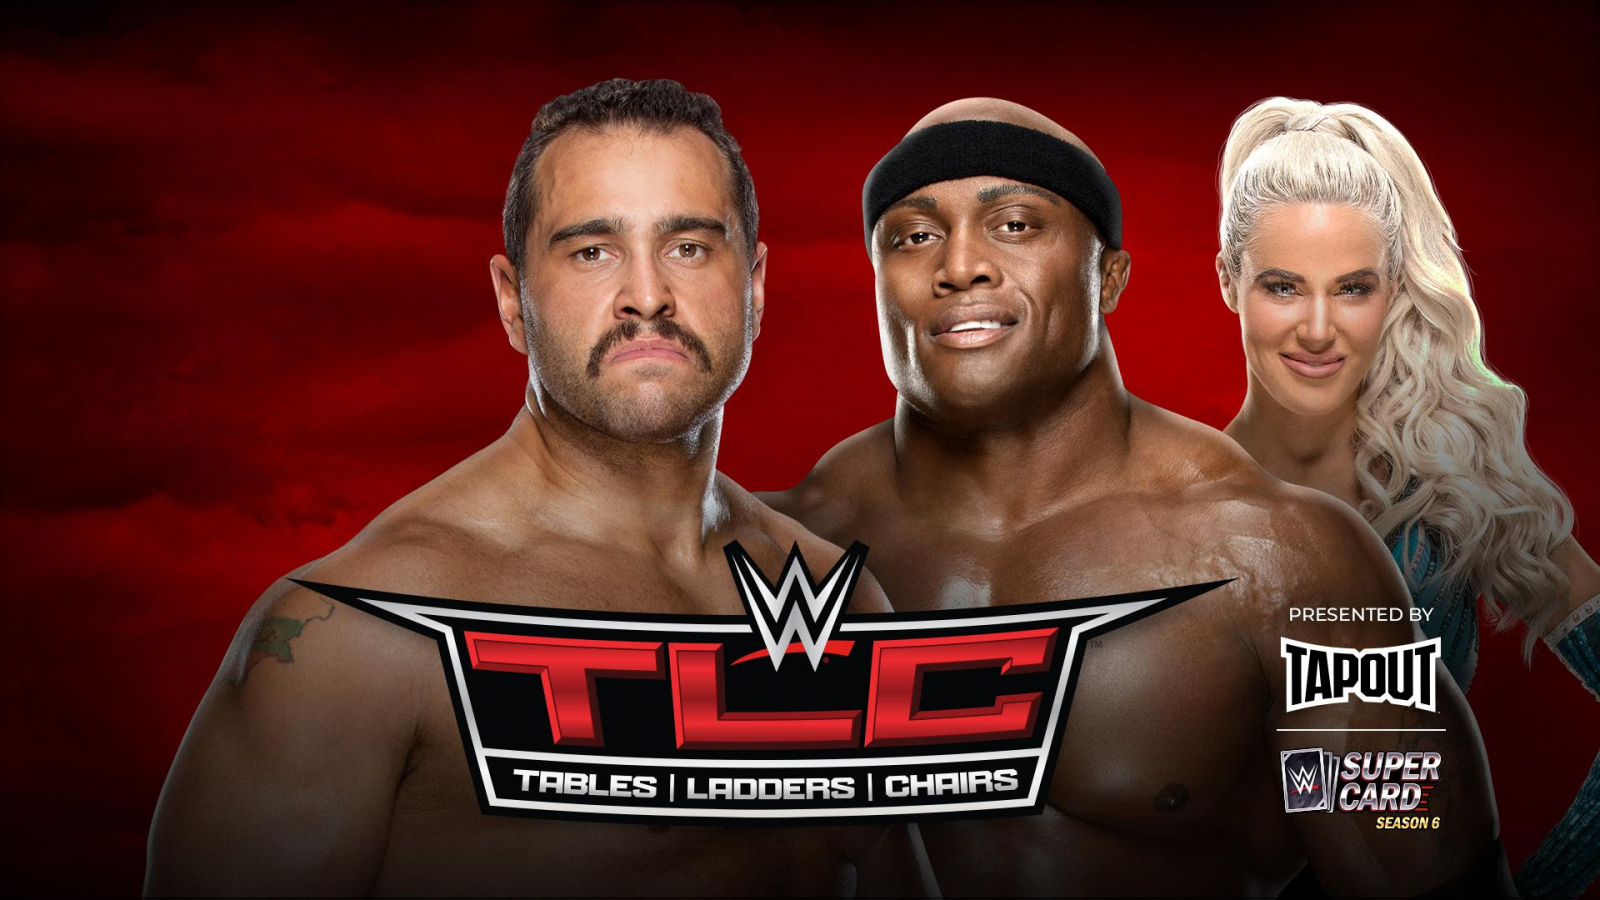 WWE TLC live streaming Where and how to watch the payperview event